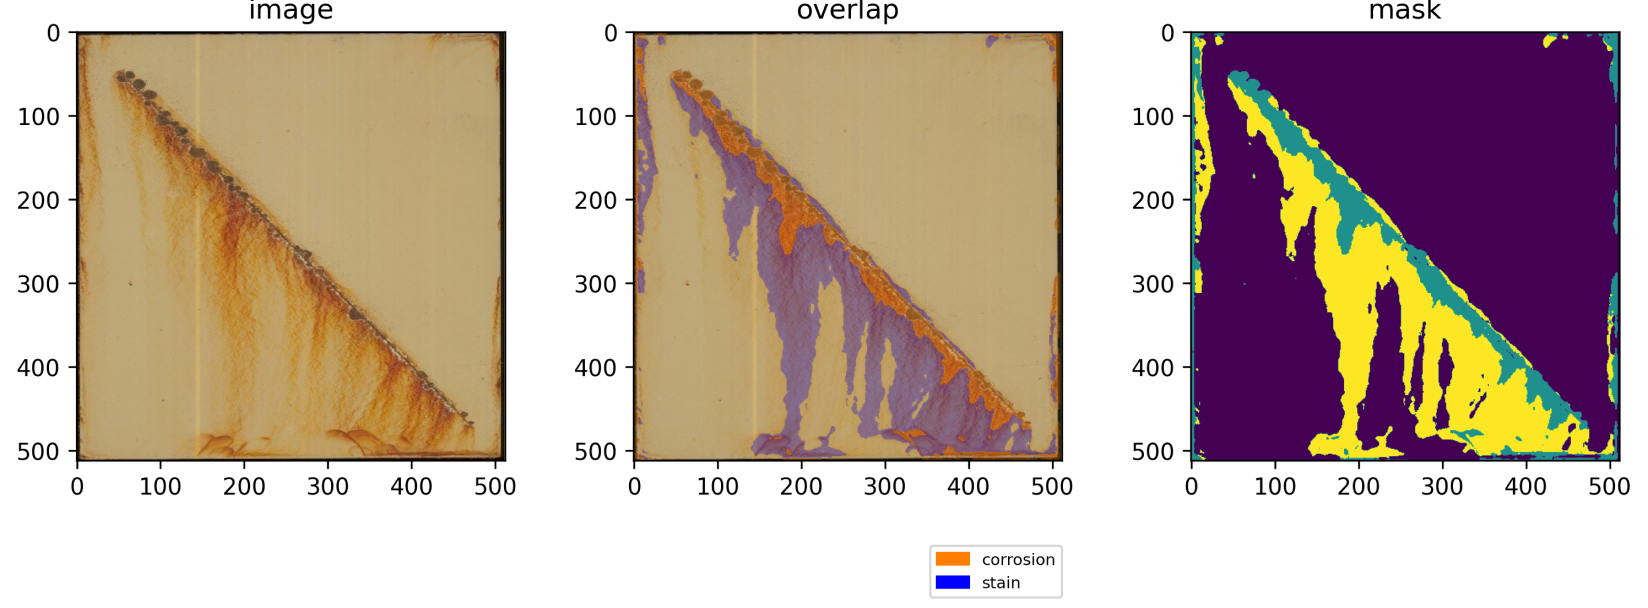 How the model predicts corrosion